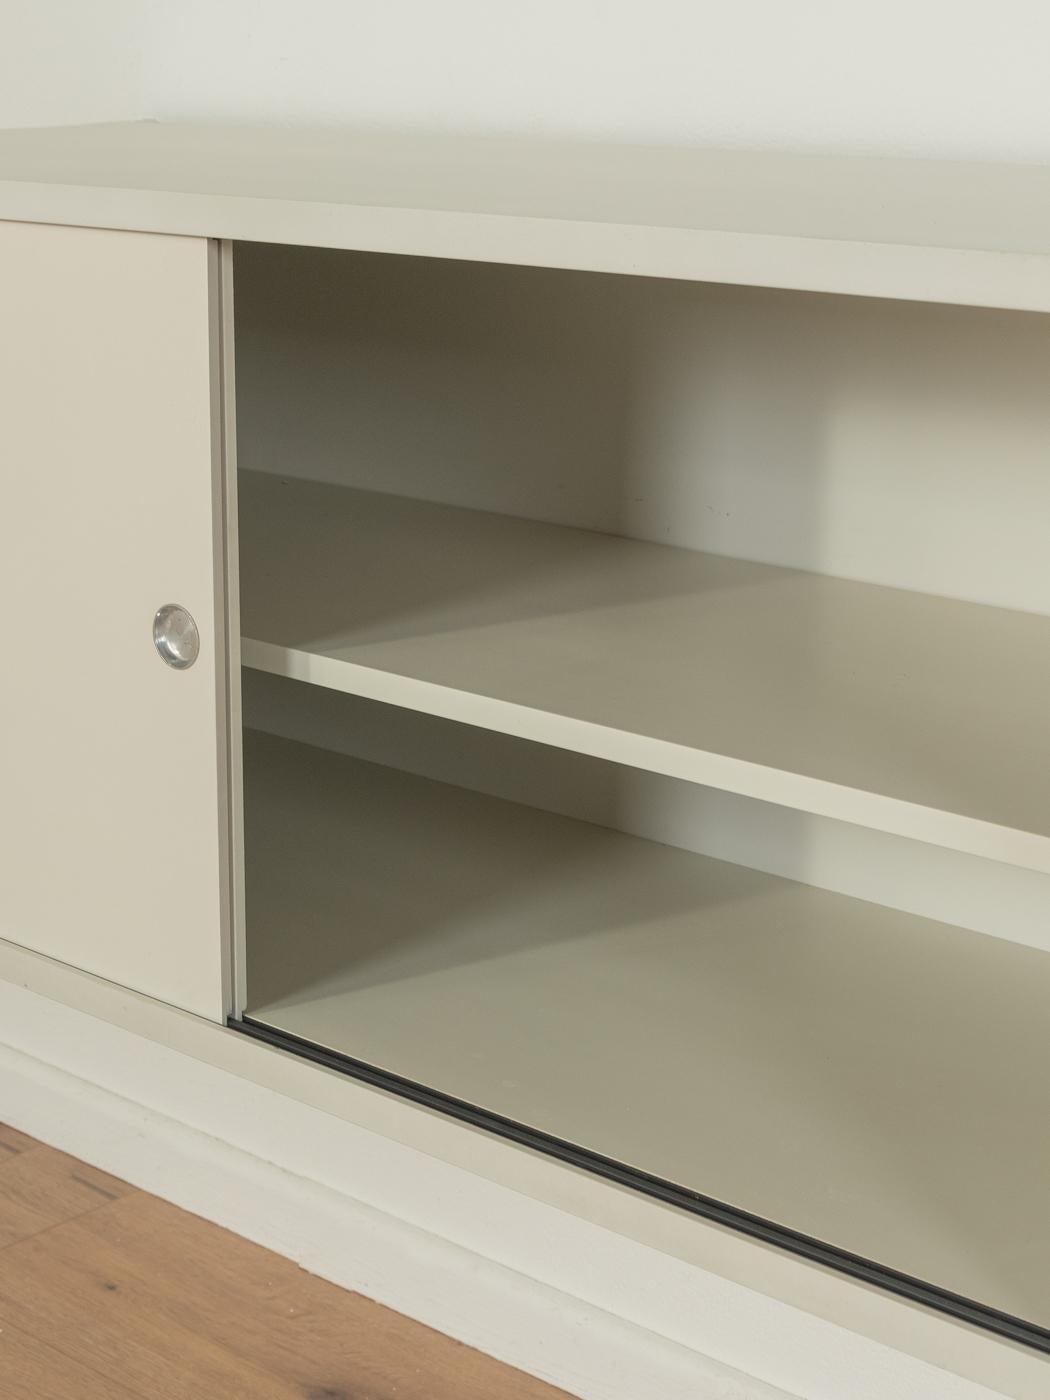  606 Shelving system, Dieter Rams for Vitsœ  In Good Condition For Sale In Neuss, NW